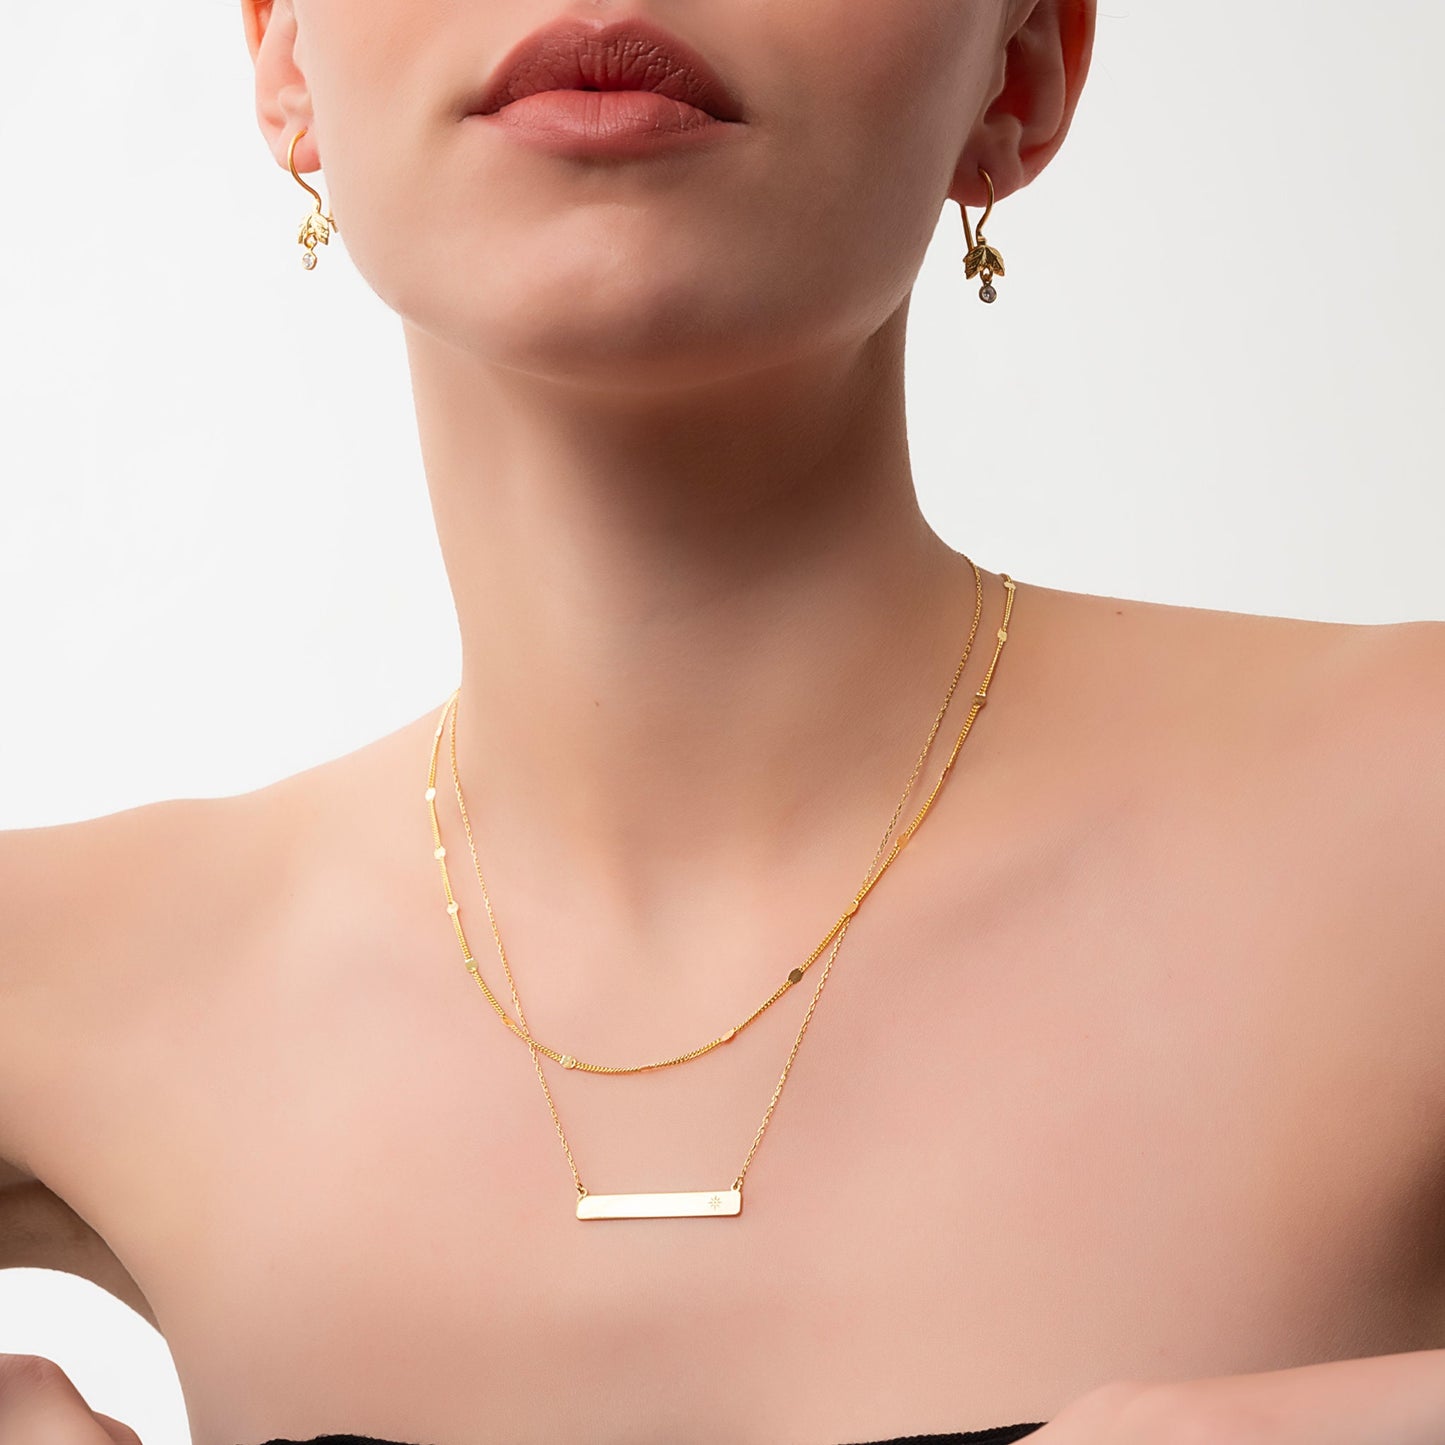 Shiny Gold Minimal Necklace, Everyday Silver Chain Necklace